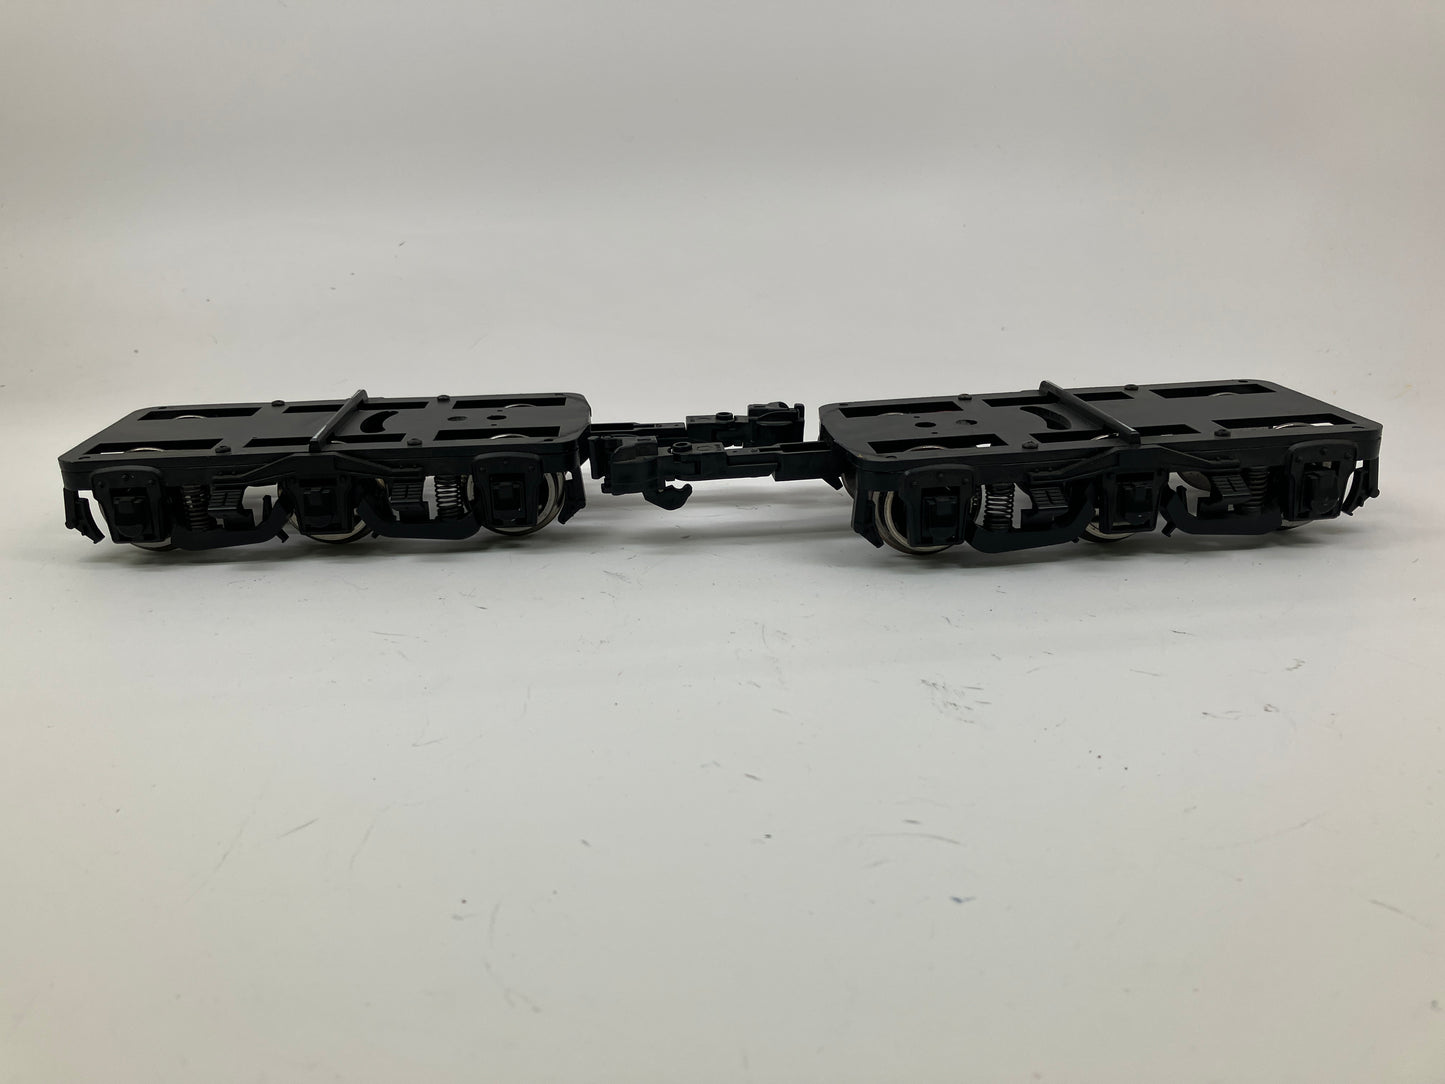 Aristo Craft Trains heavyweight passenger 6 Axle Truck with Electric Pickups 1 Pair Used